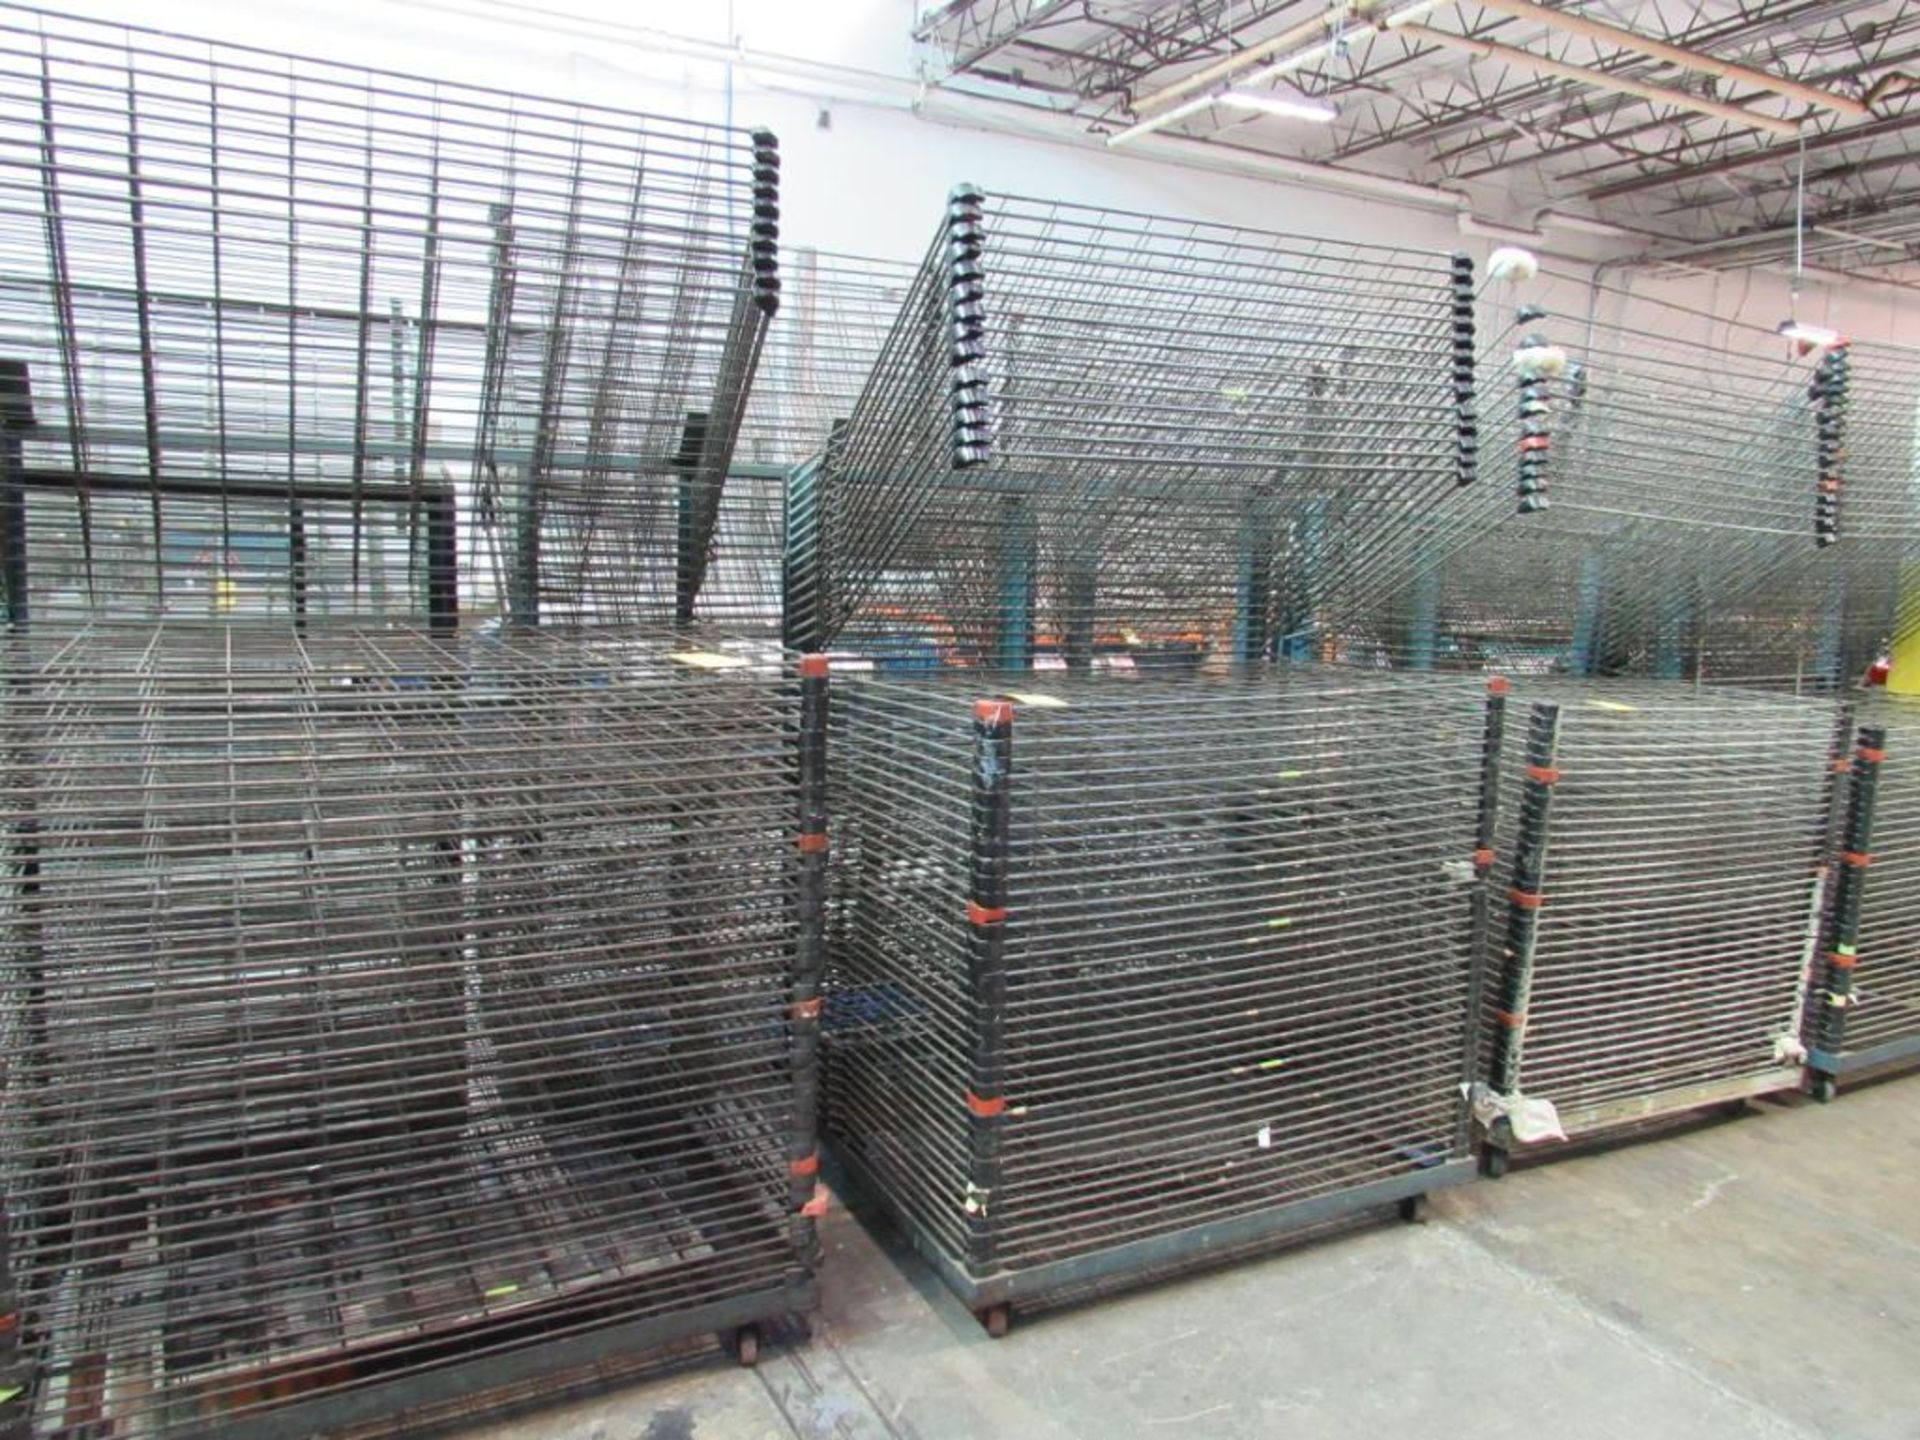 LOT: (3) Portable Drying Racks 30 in./32 in. x 48 in. x 60 in. High approx. w/48 Racks approx.